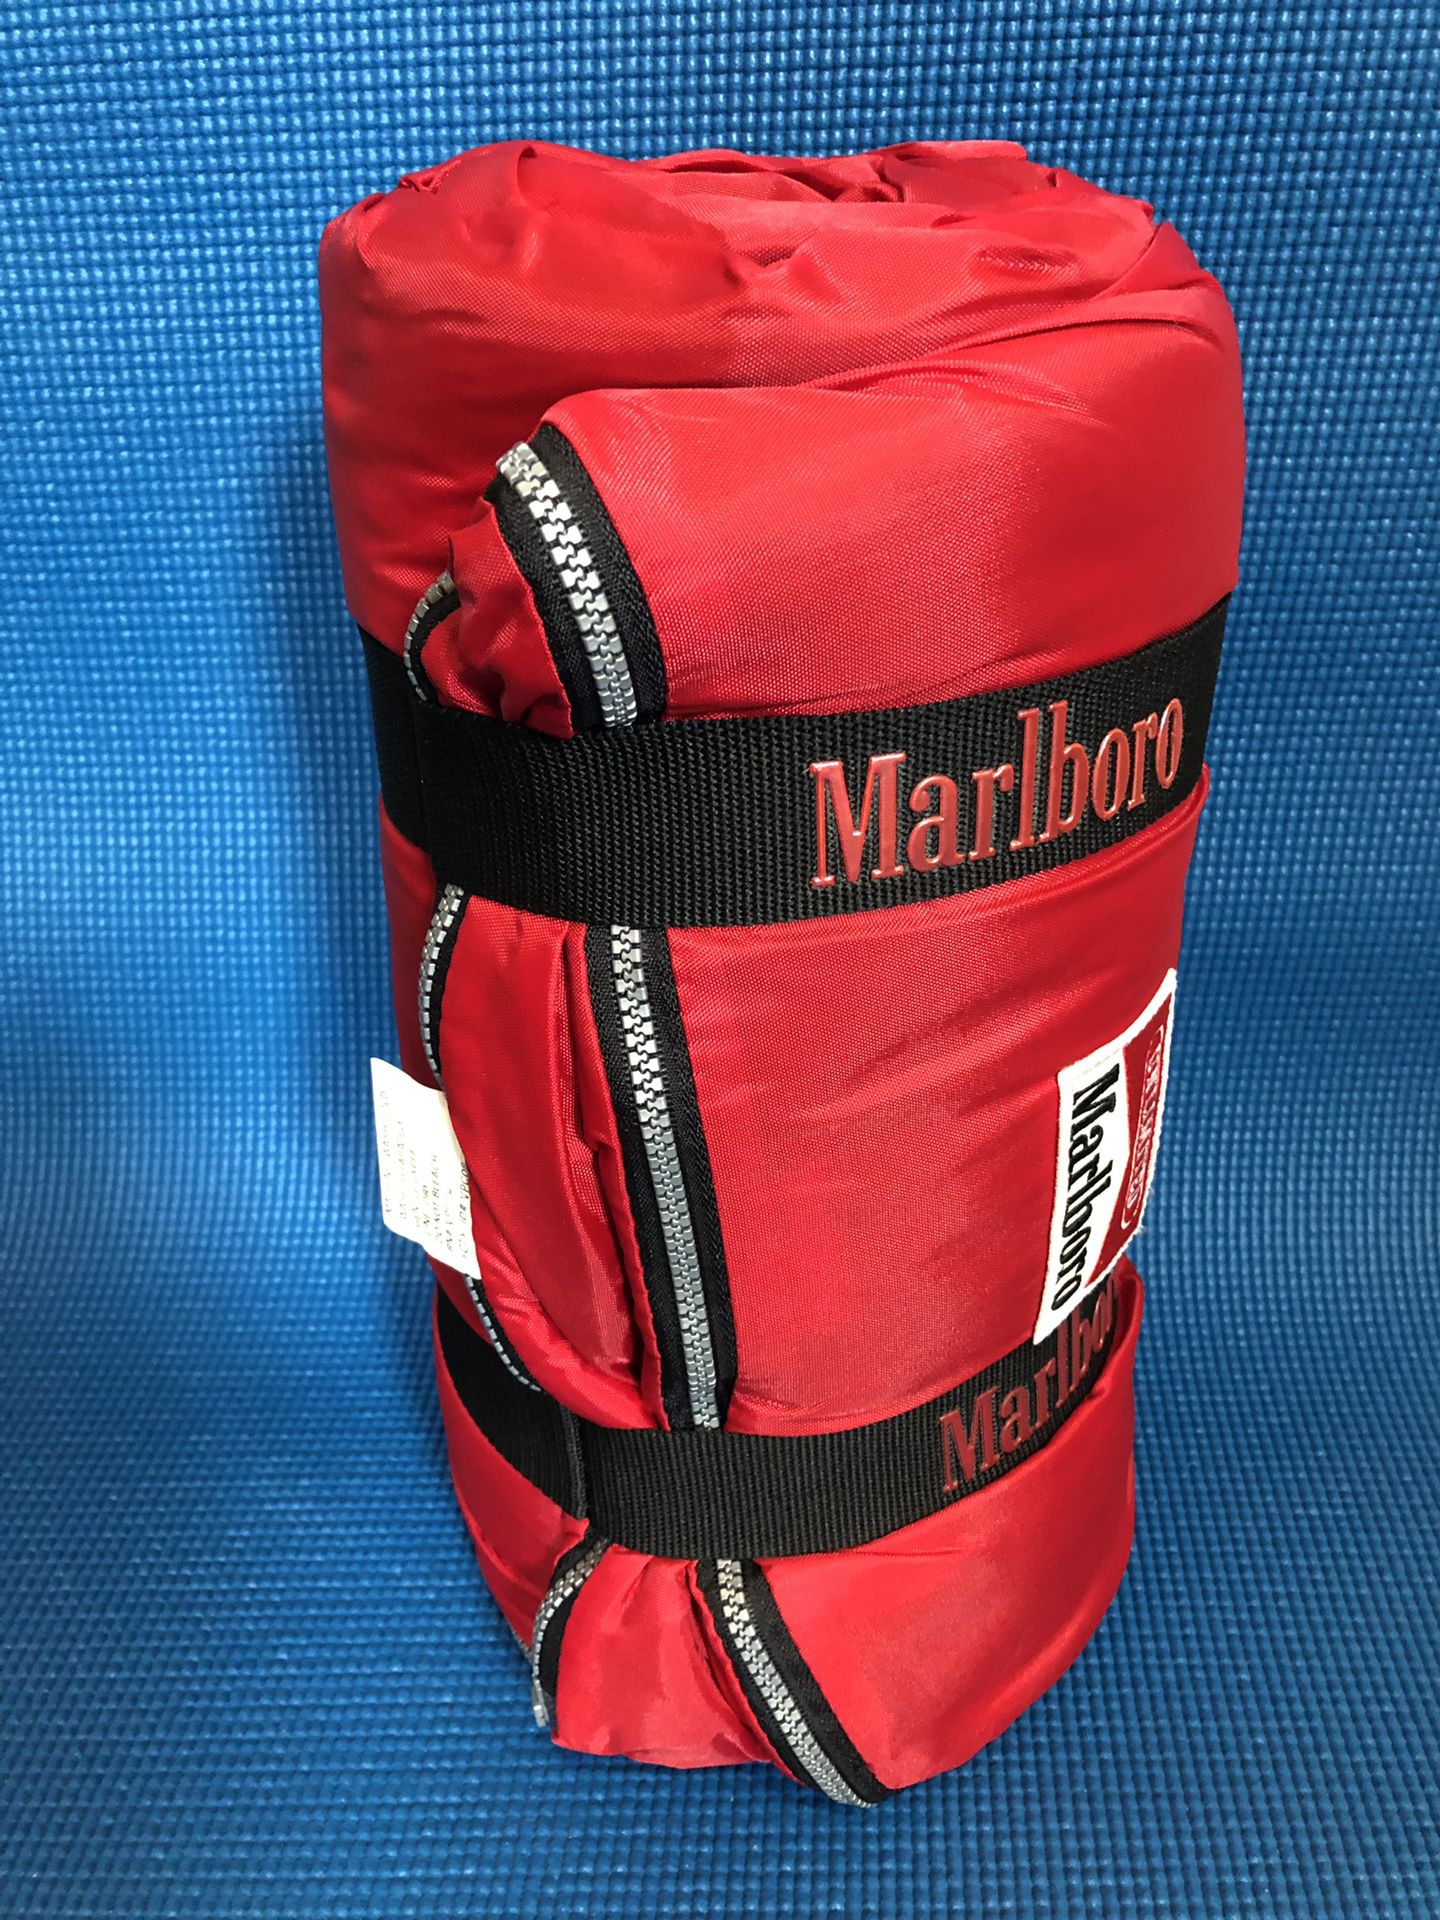 Marlboro Unlimited Red Sleeping Bag NEW for Sale in Fort Lauderdale, FL ...